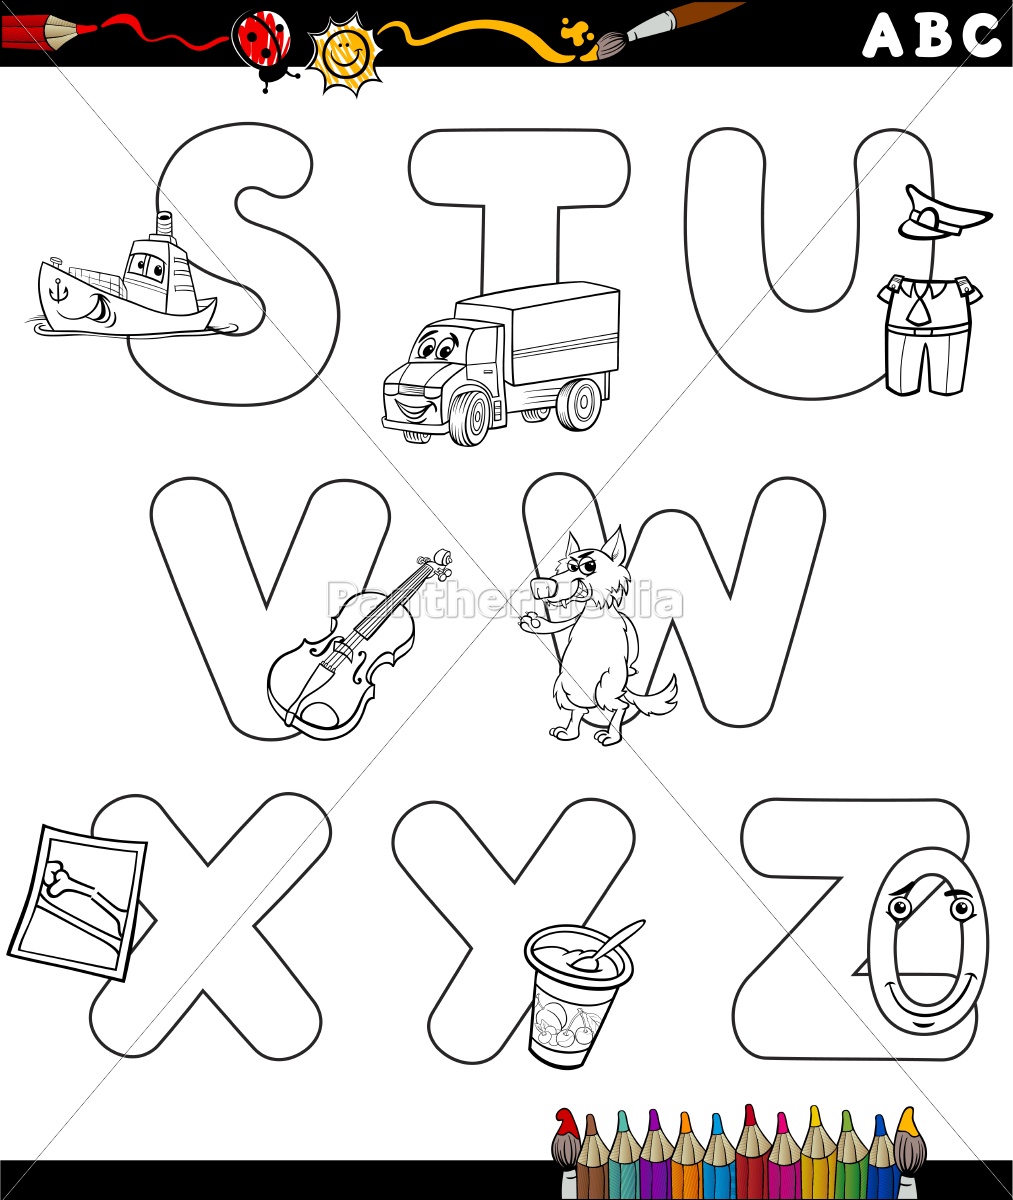 97 Cartoon Alphabet Coloring Pages Pictures